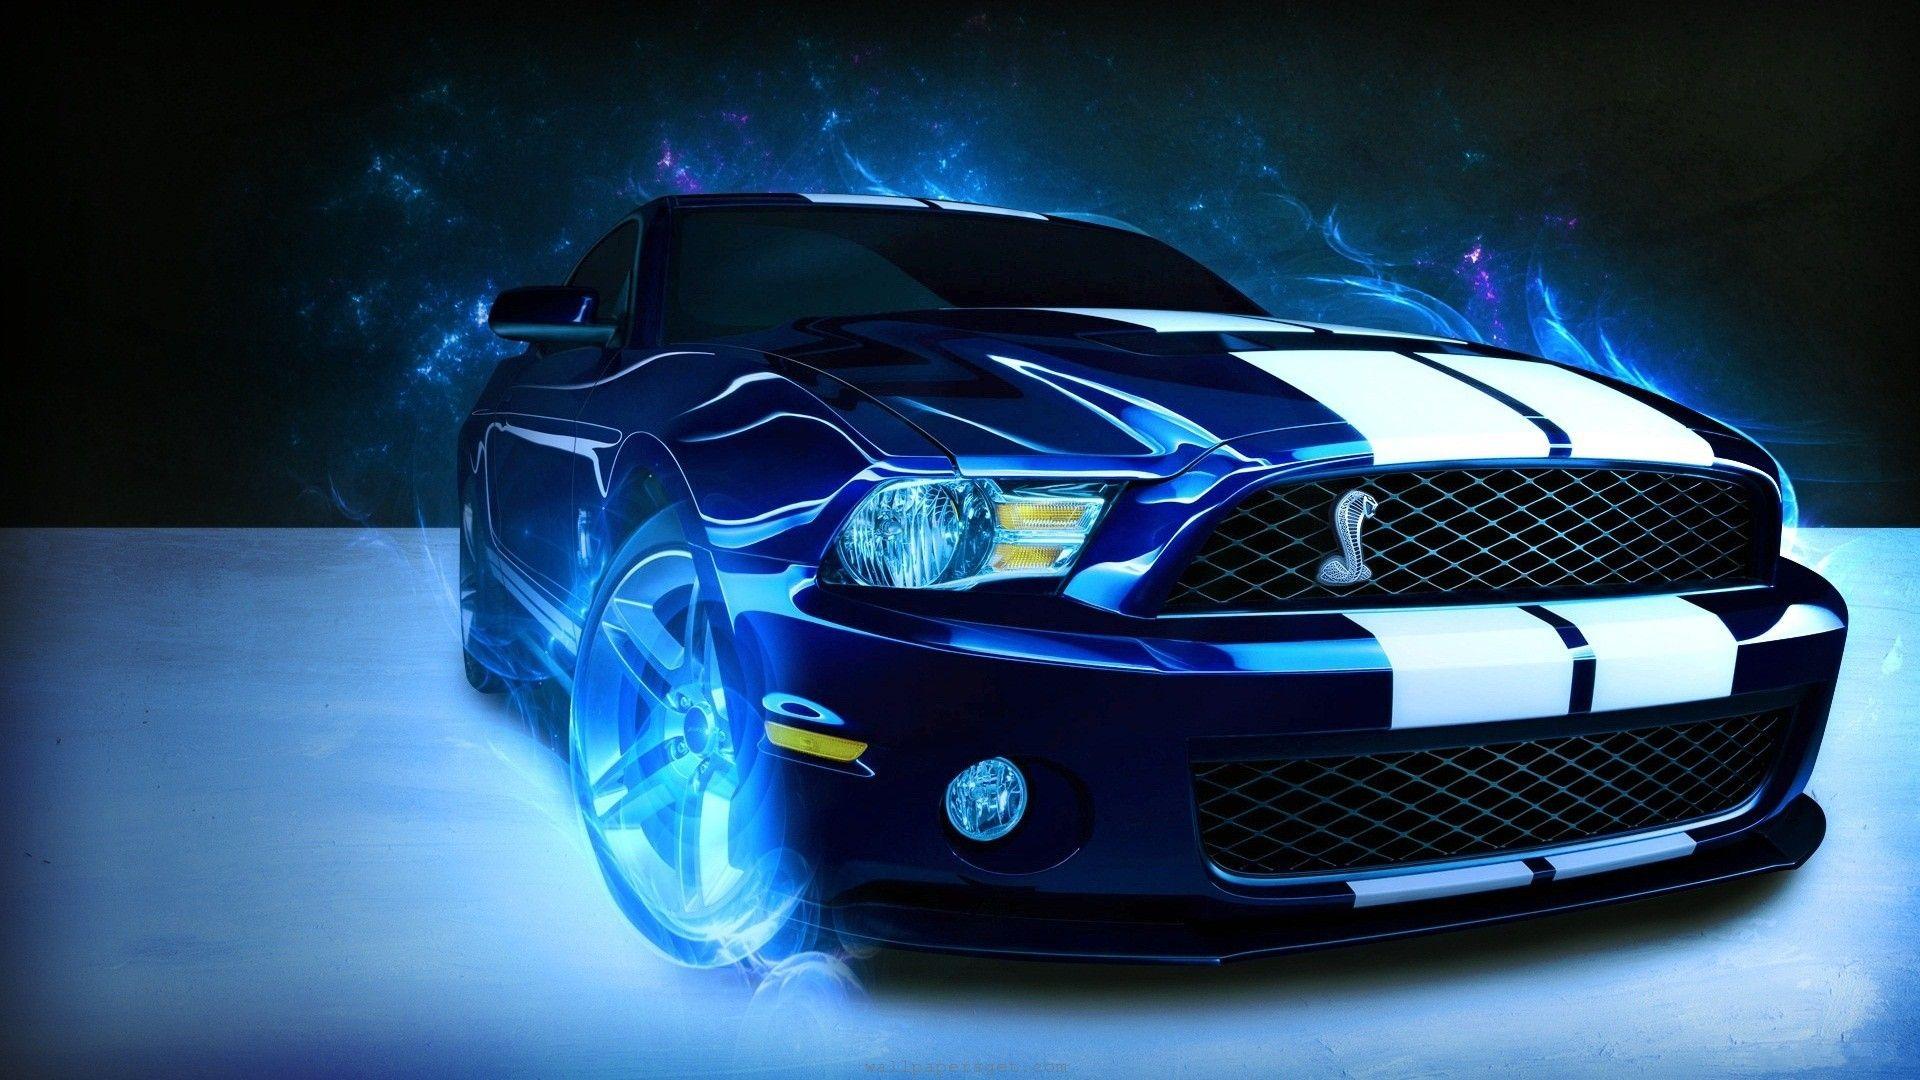 Blue Mustang Wallpapers - Top Free Blue